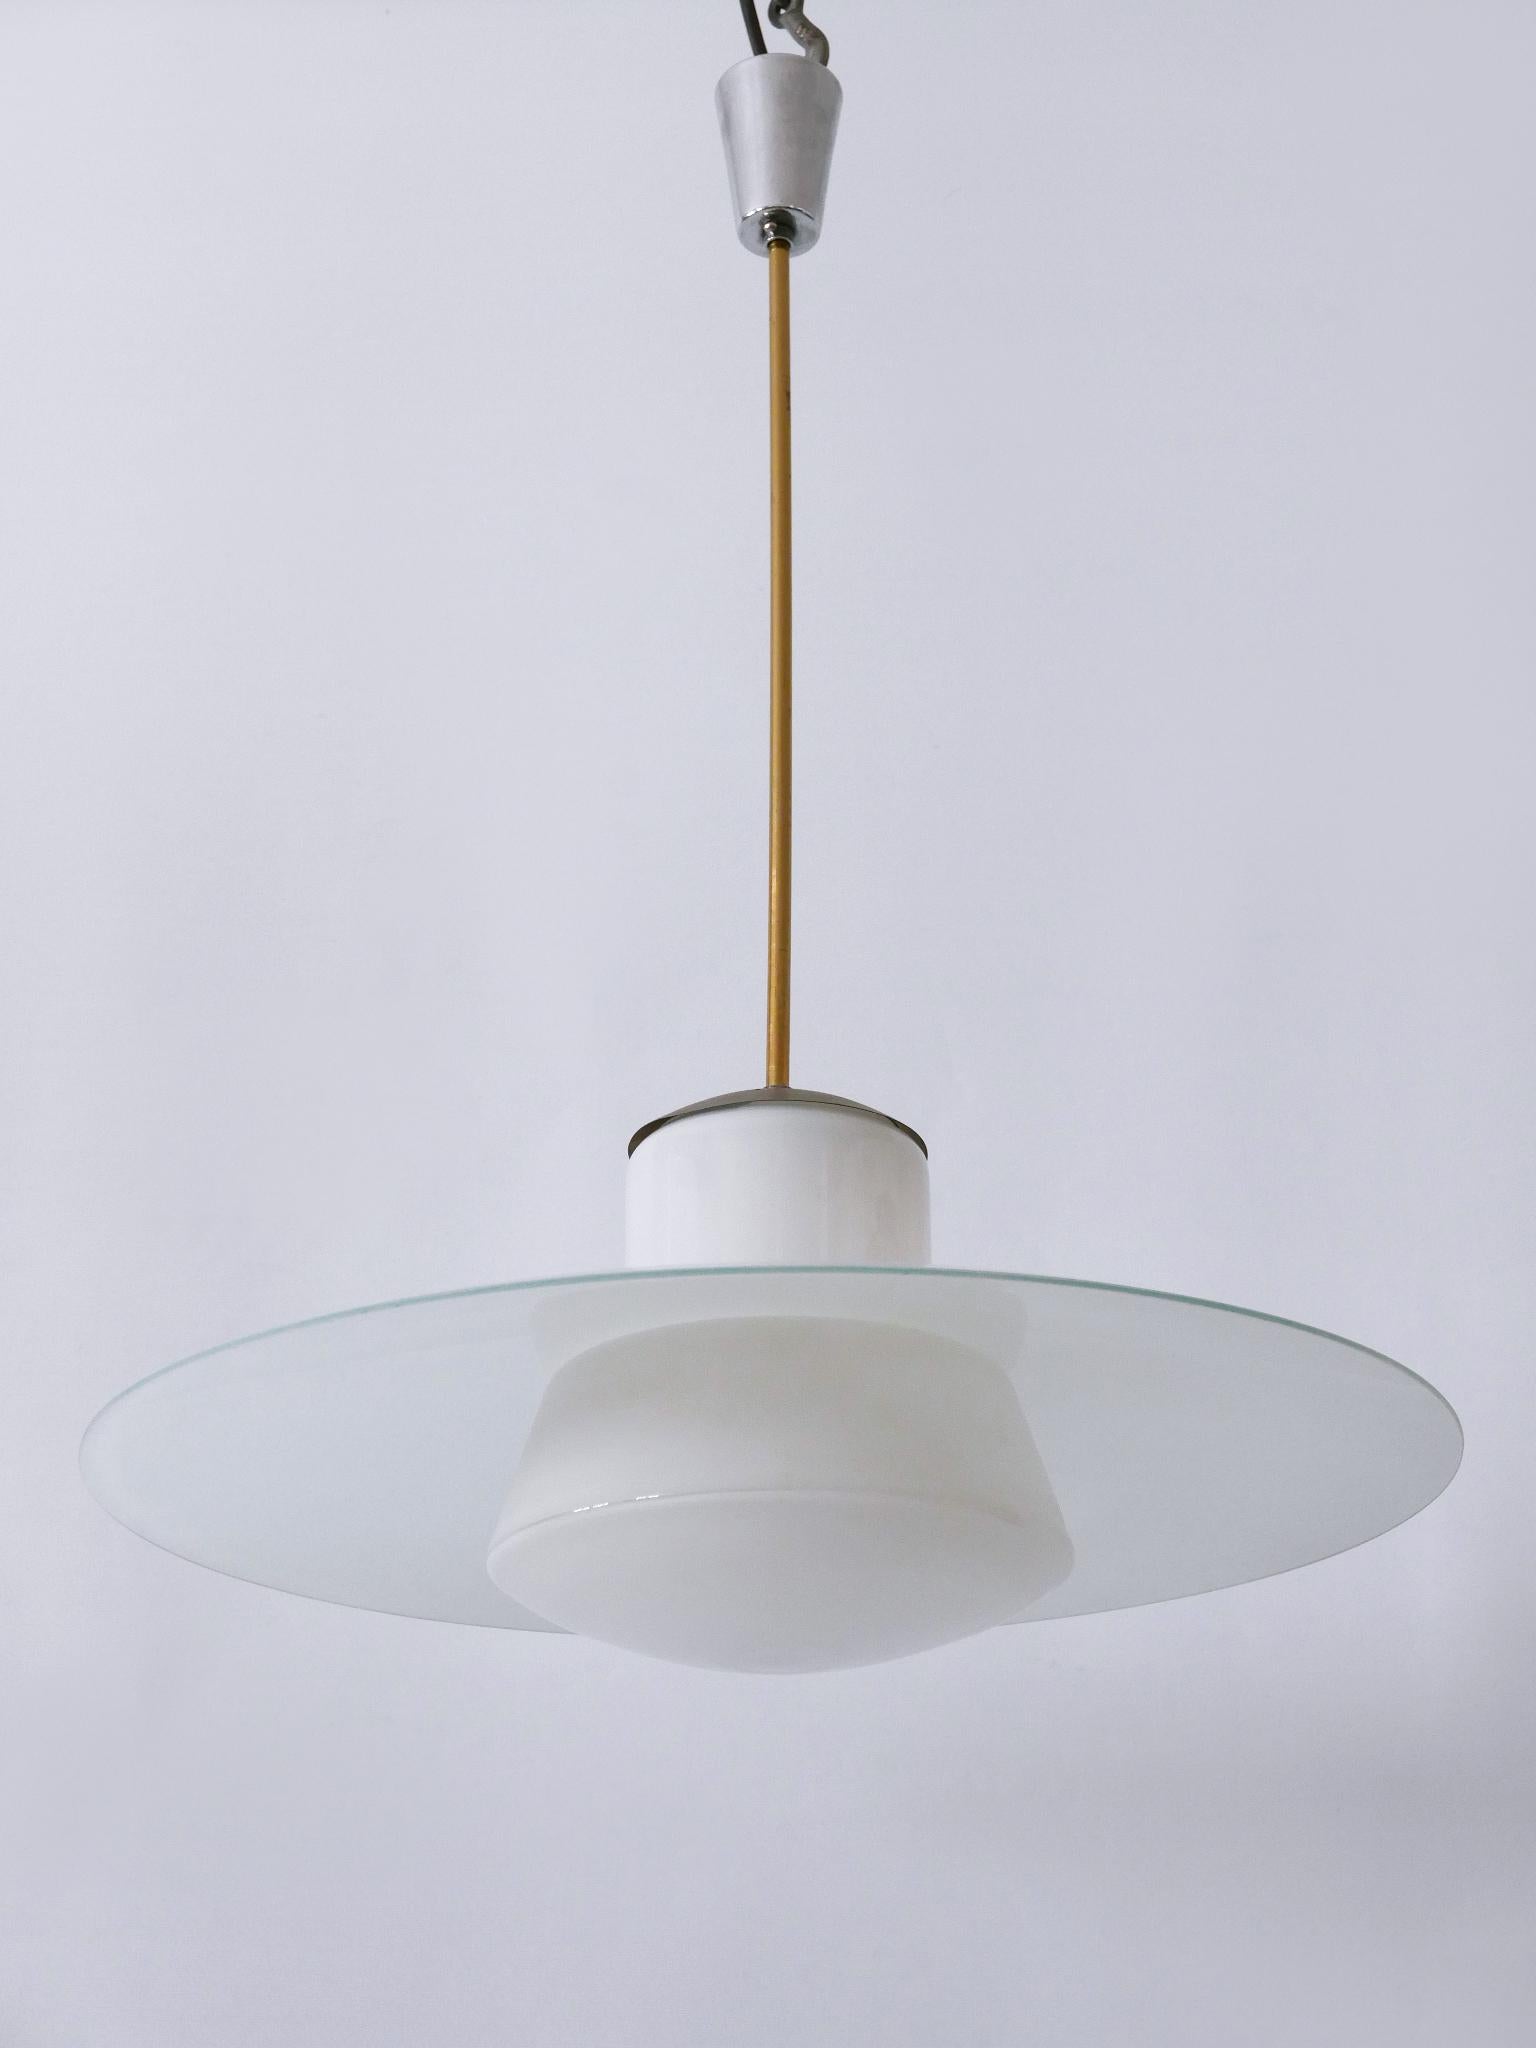 Extremely rare and elegant Mid-Century Modern pendant lamp or hanging light. Catalog no 913/3522 - 55. Designed by Wolfgang Tümpel for Doria Leuchten, Germany, 1950s.

Executed in opaline glass and chrome-plated brass, the pendant lamp needs 1 x E27